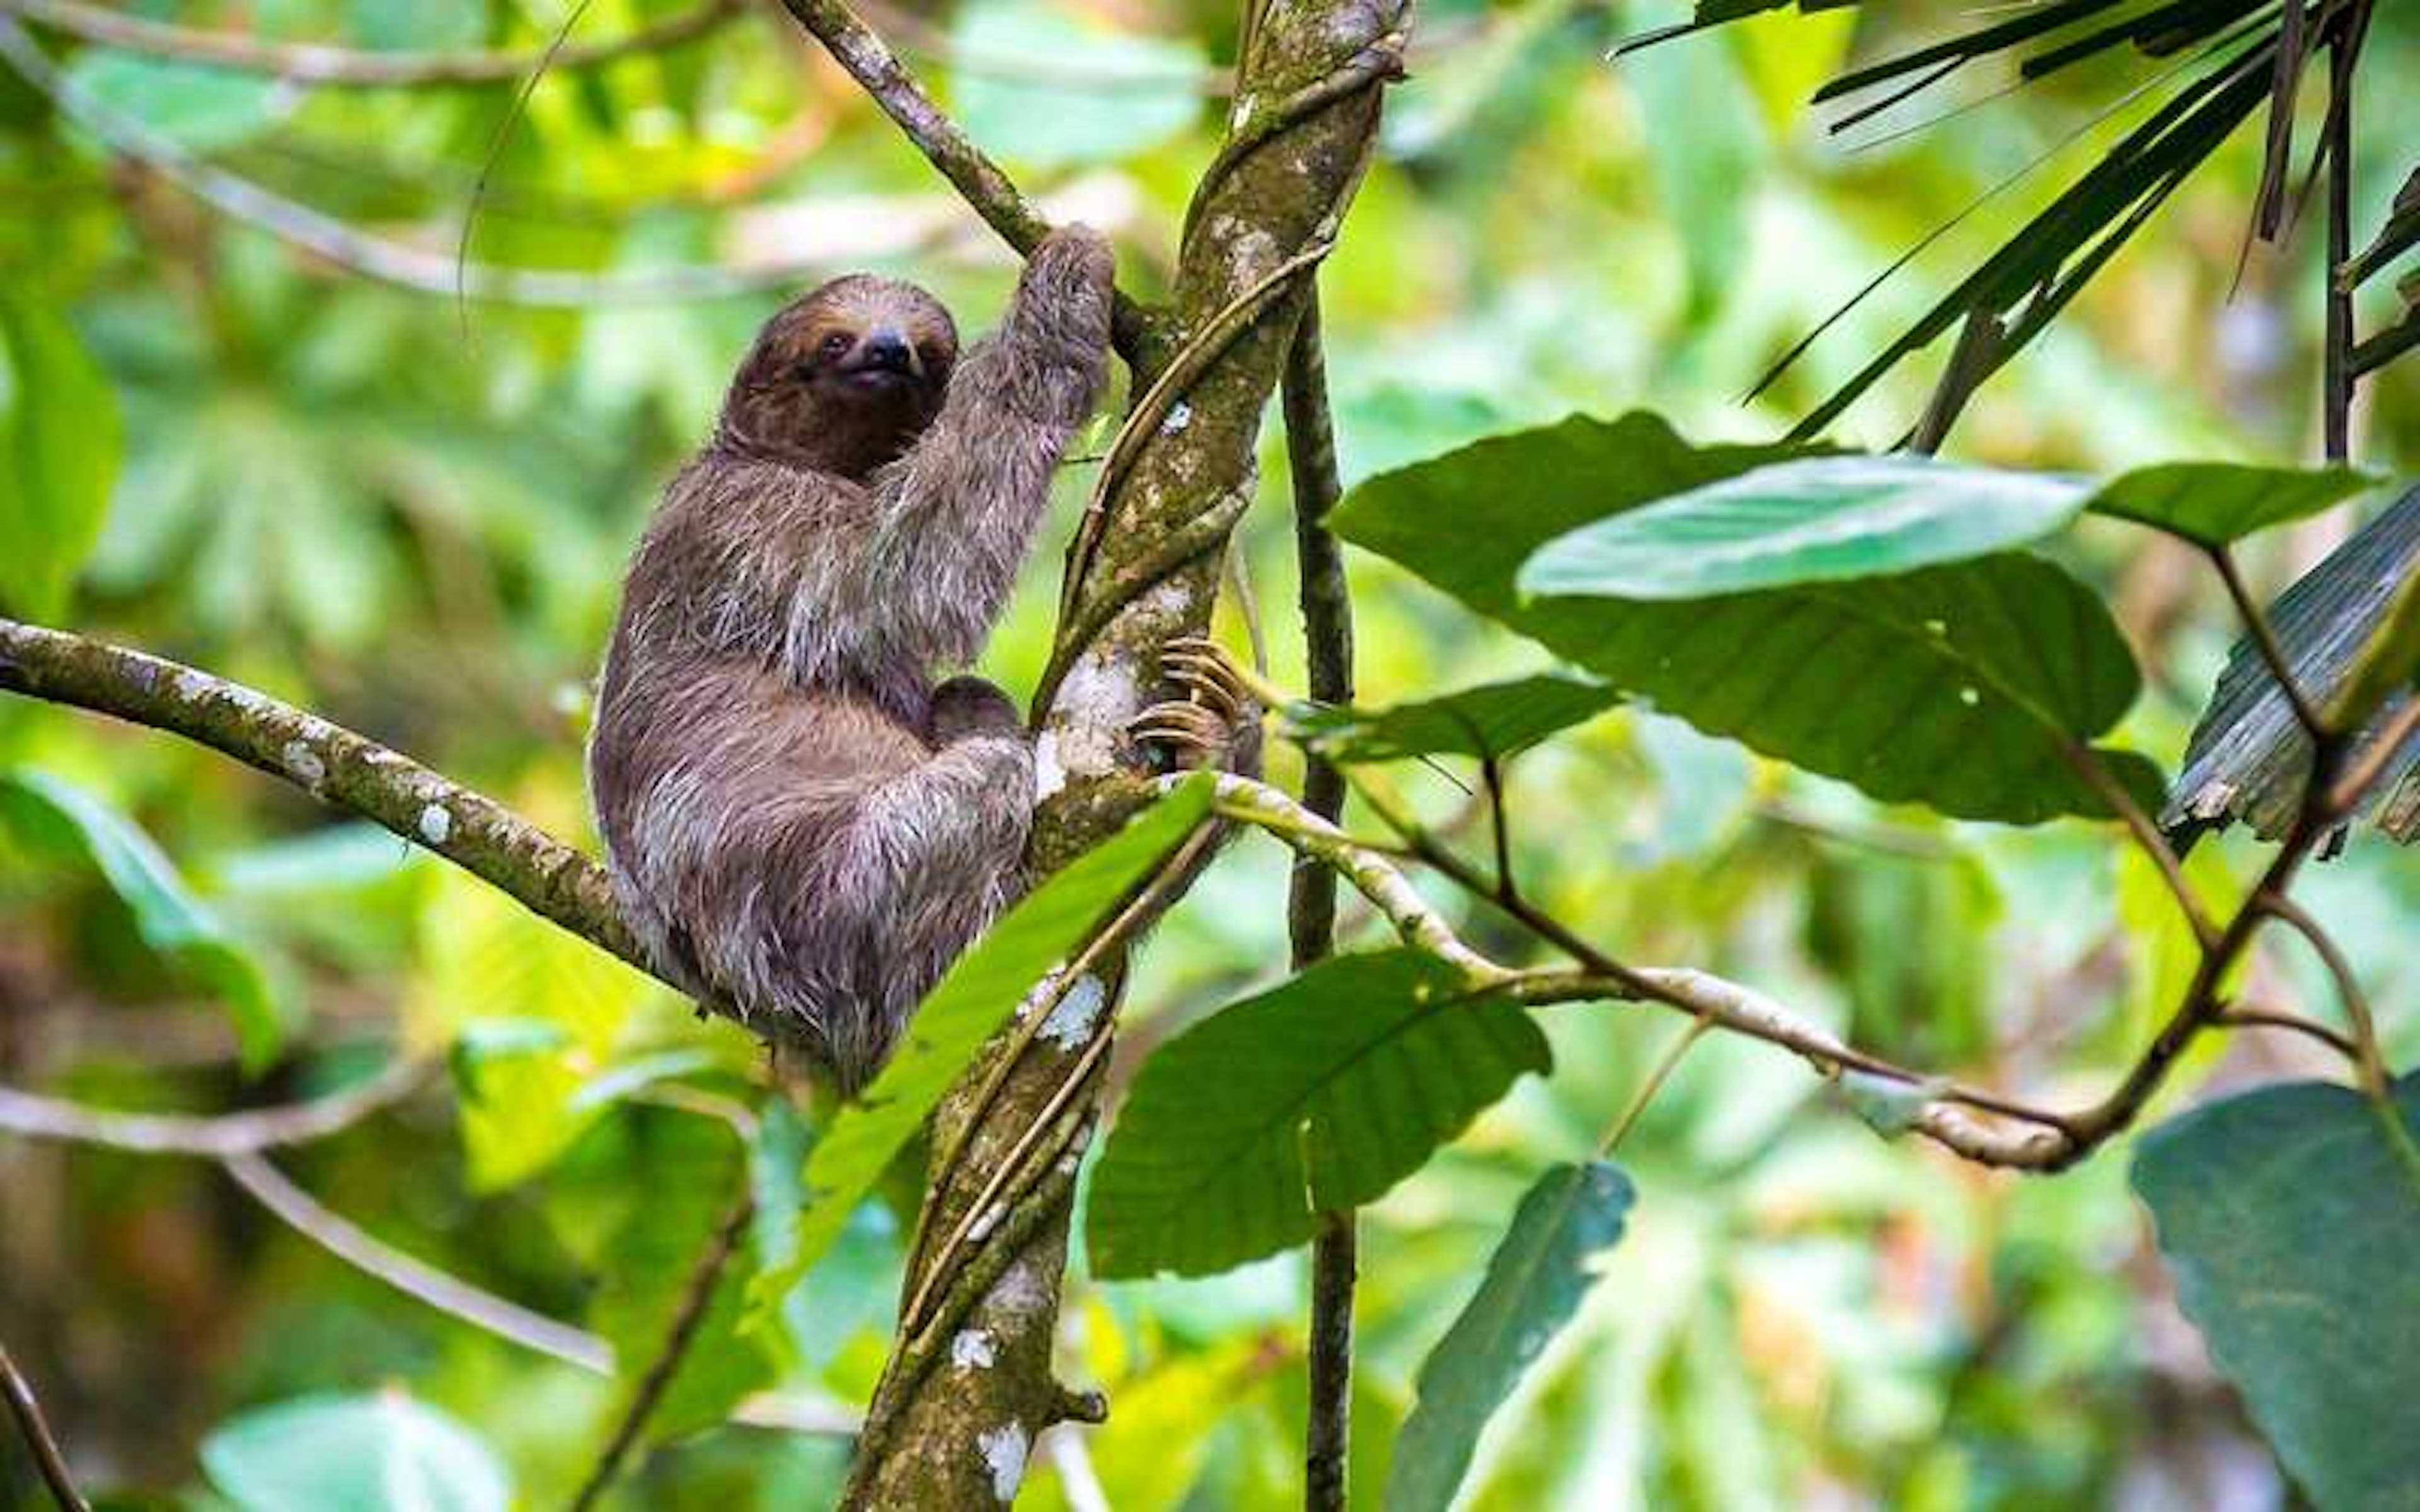 Spend your days watching sloths at this luxury Costa Rican resort